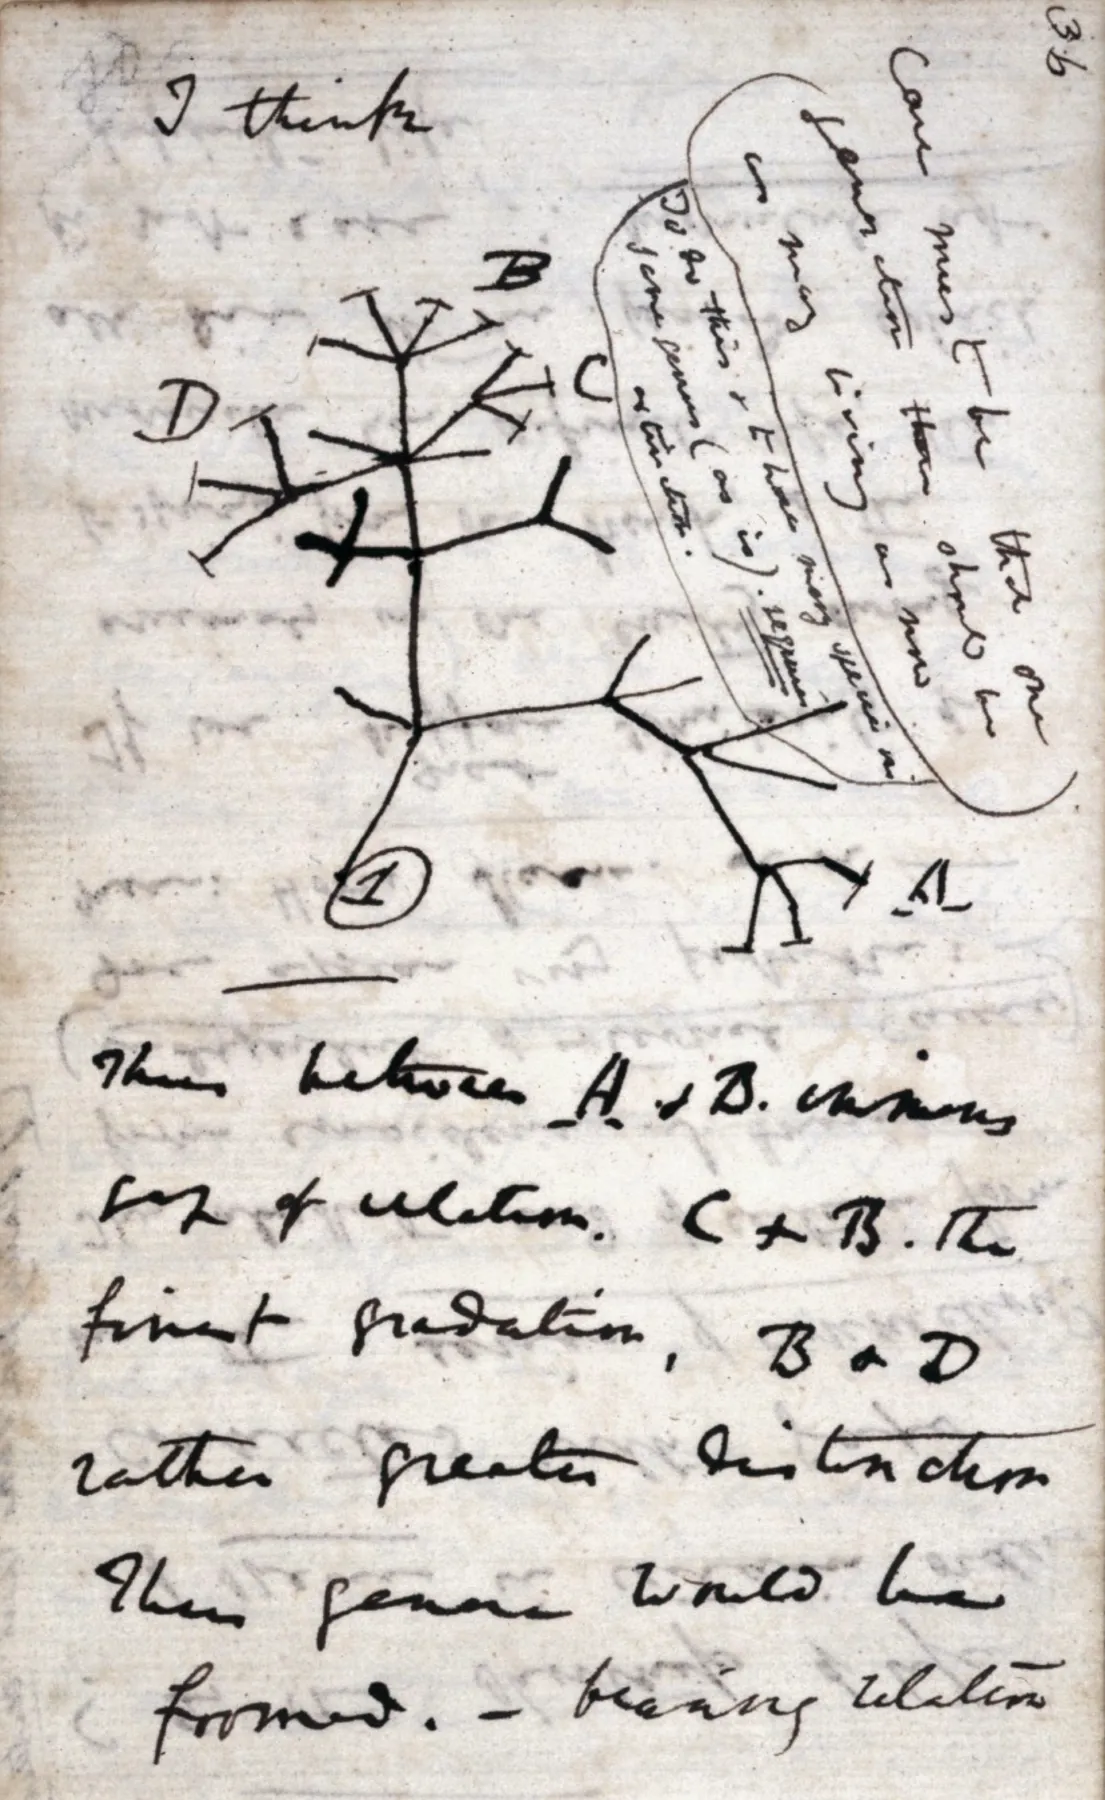 A page from Charles Darwin's notebooks showing his first sketch of an evolutionary tree.